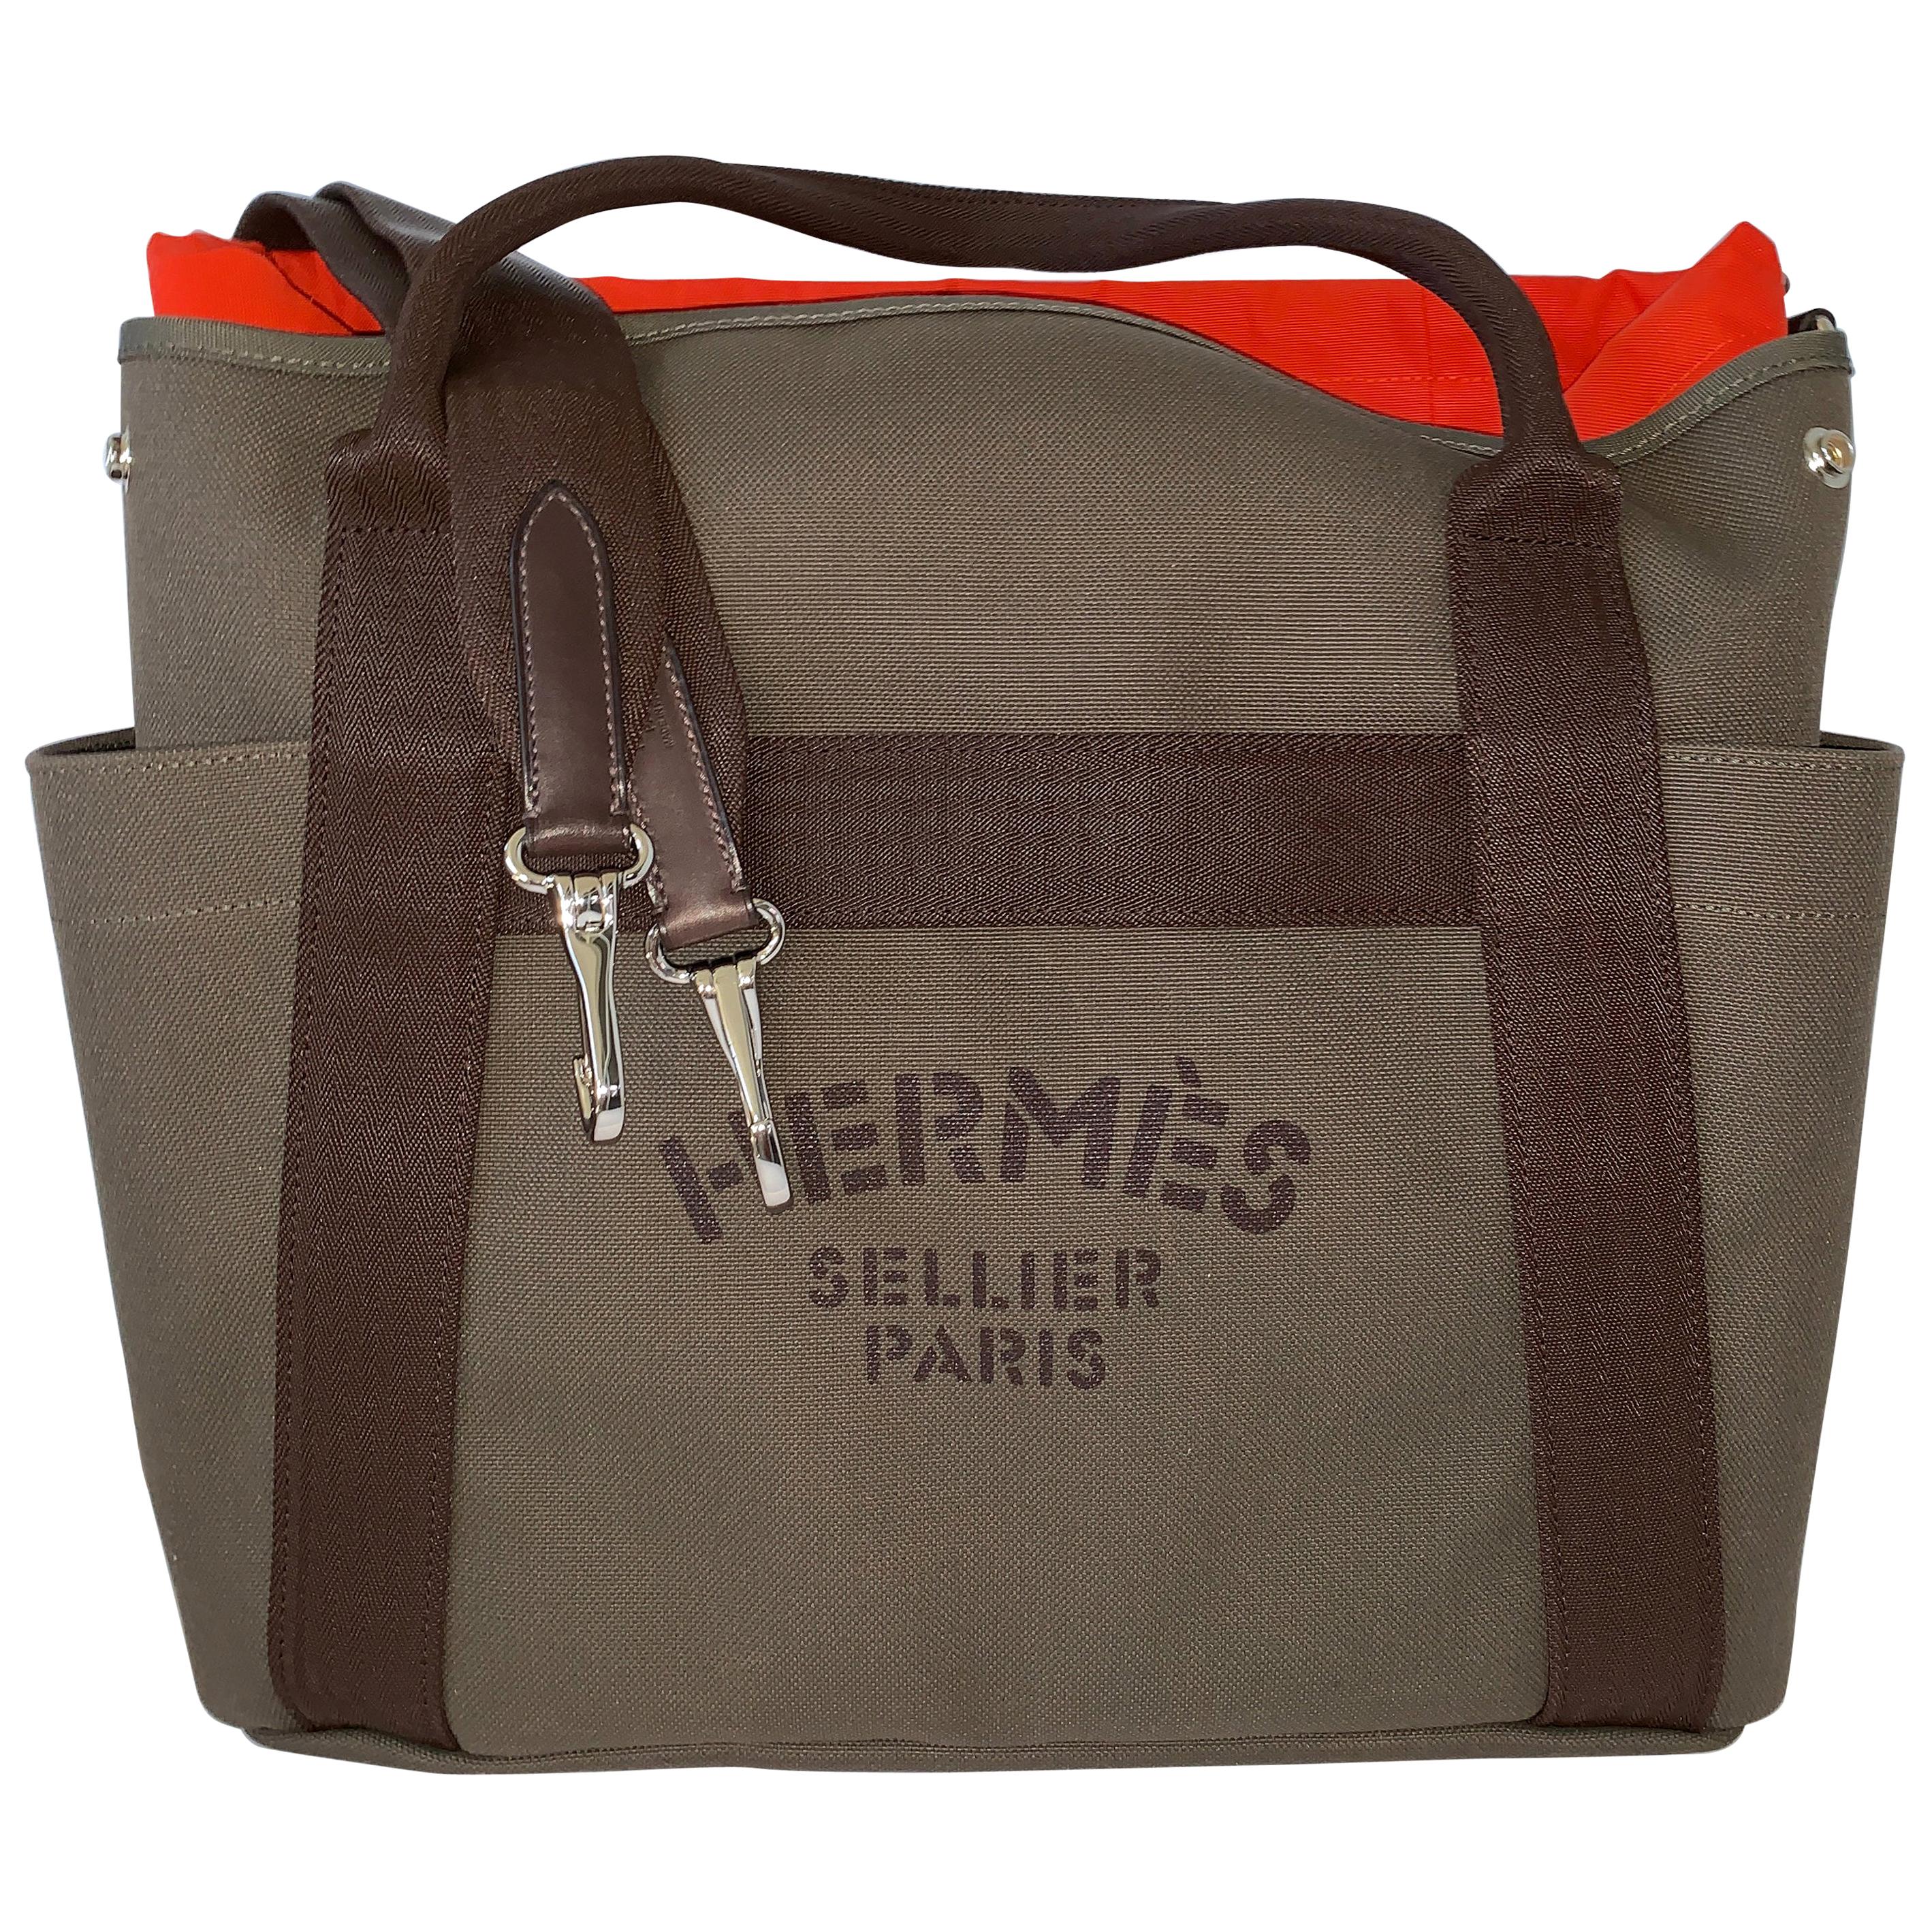 Hermès Boot and Helmut Great Travel Khaki Canvas Tote